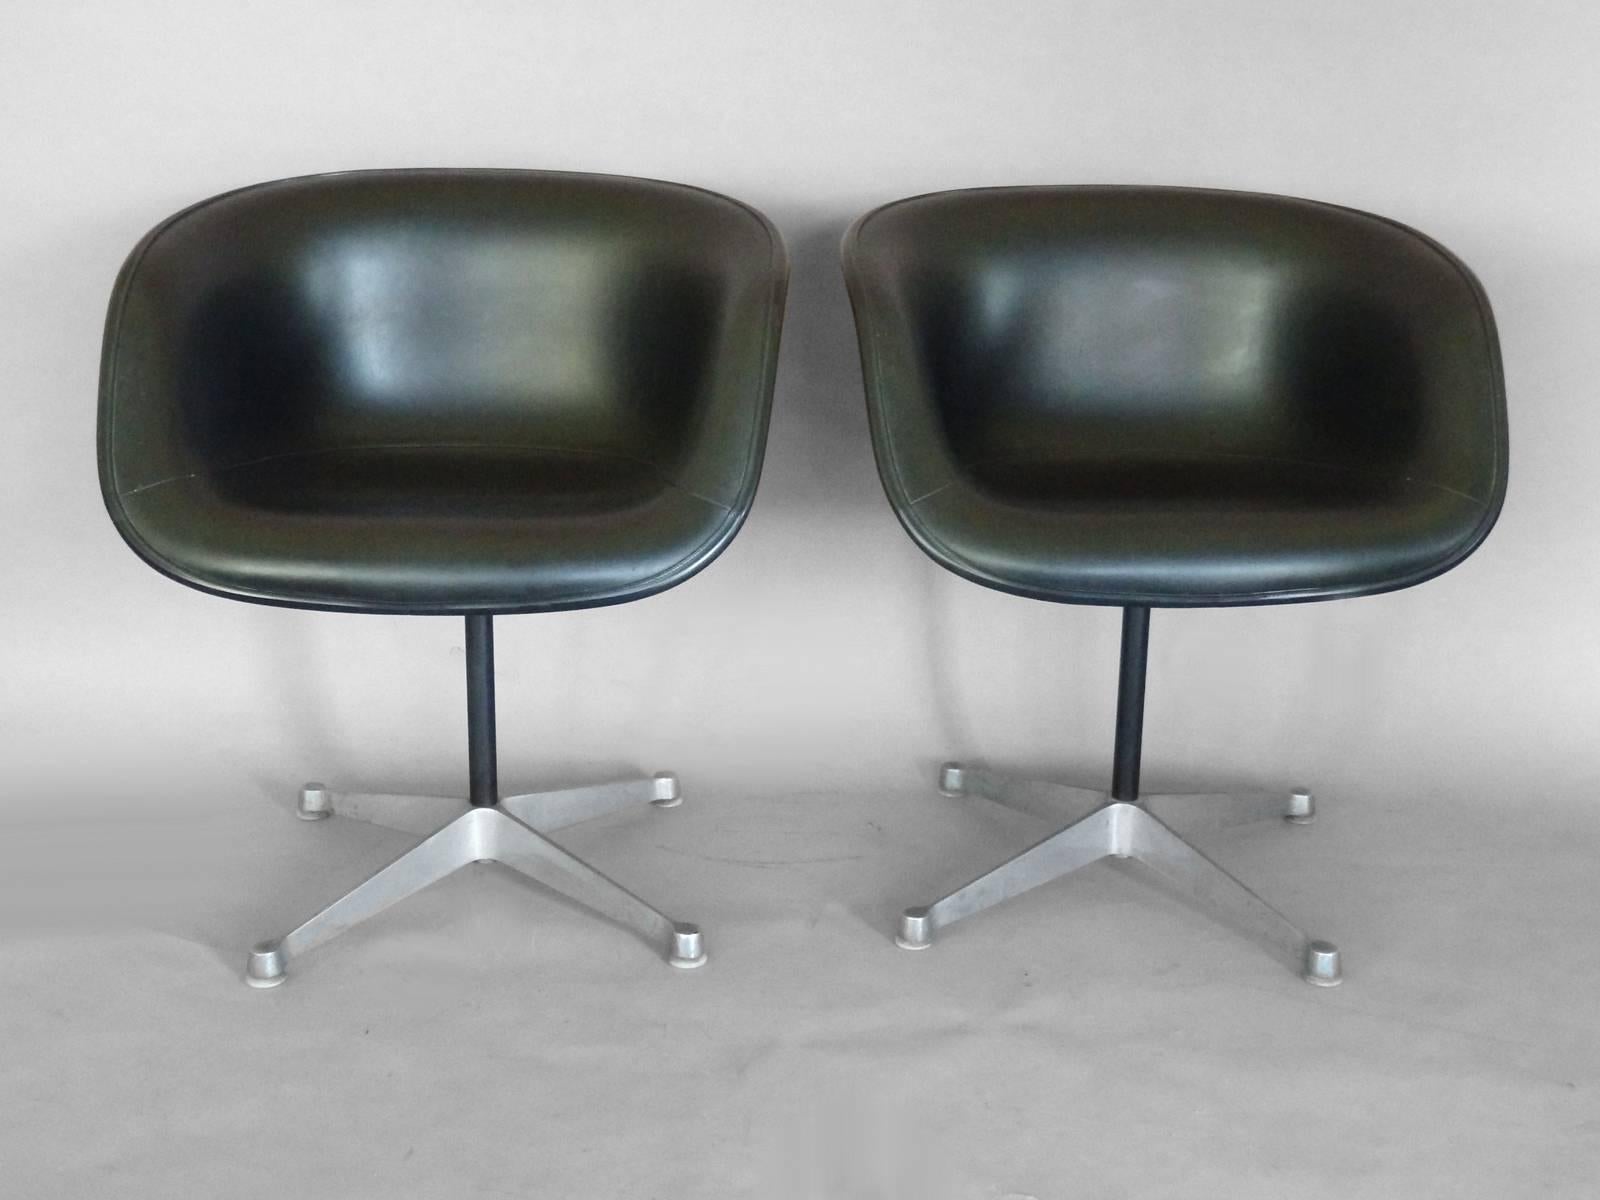 Black La Fonda Chairs chairs by Charles and Ray Eames for Herman Miller.